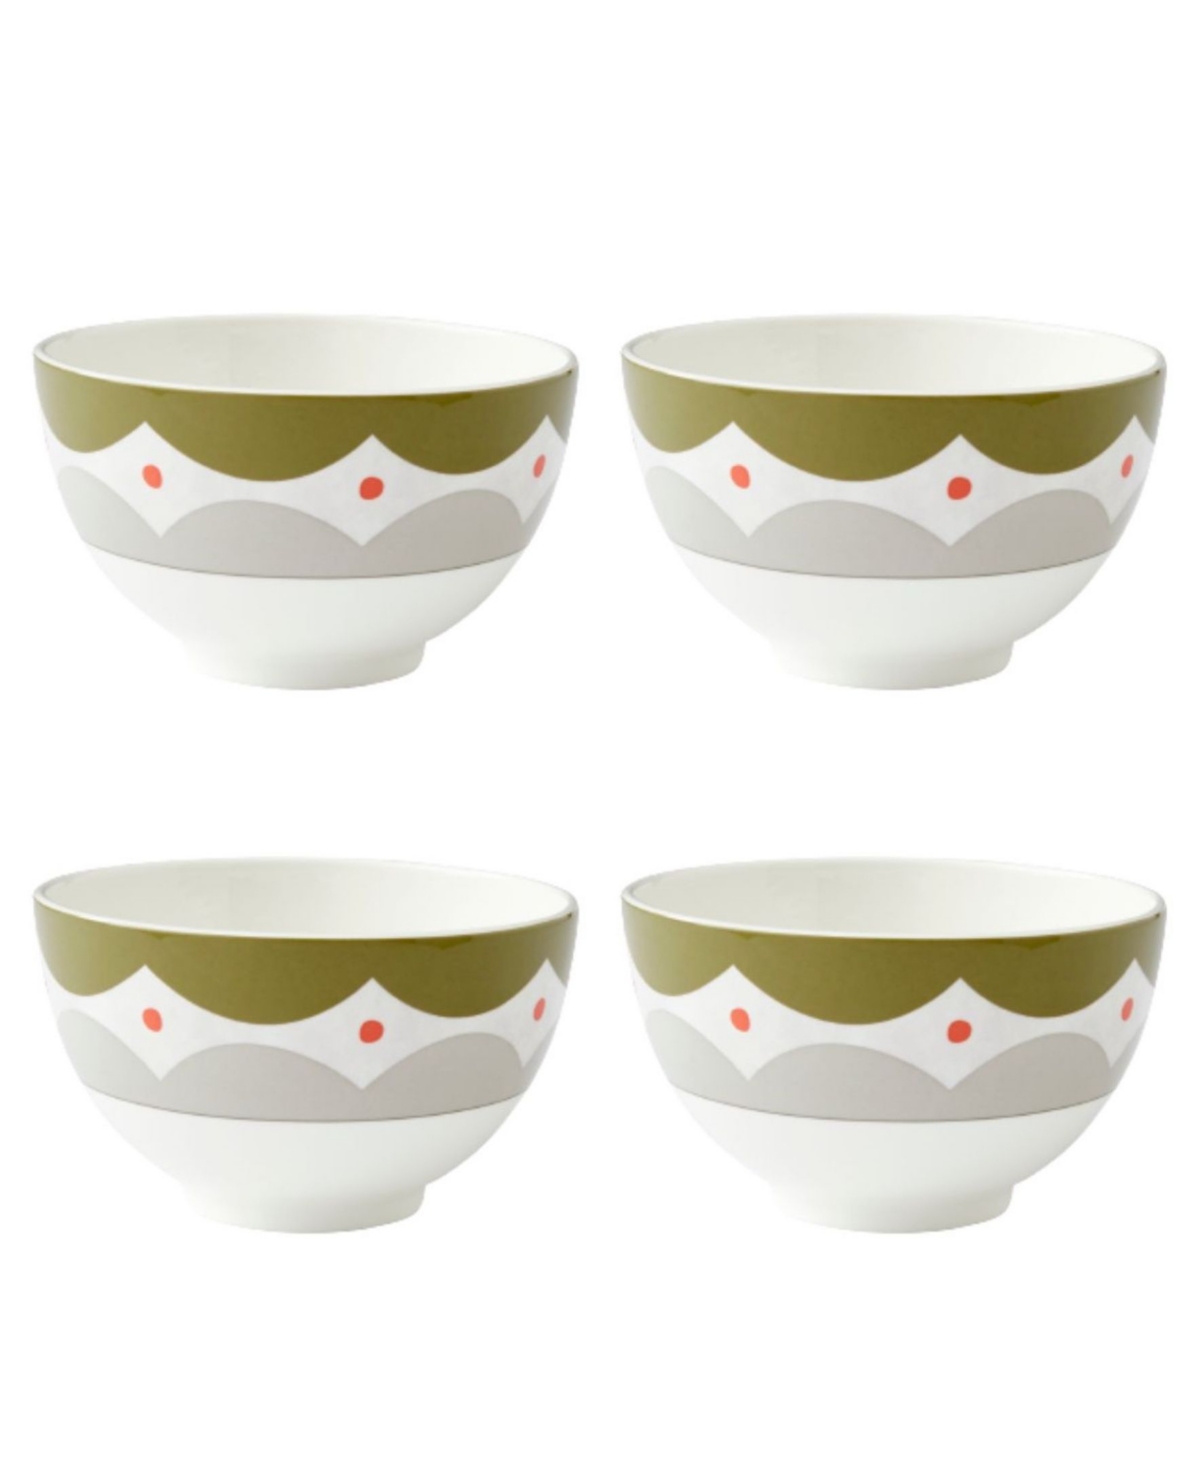 Geo 4 Piece Rice Bowls Set, Service for 4 - Assorted